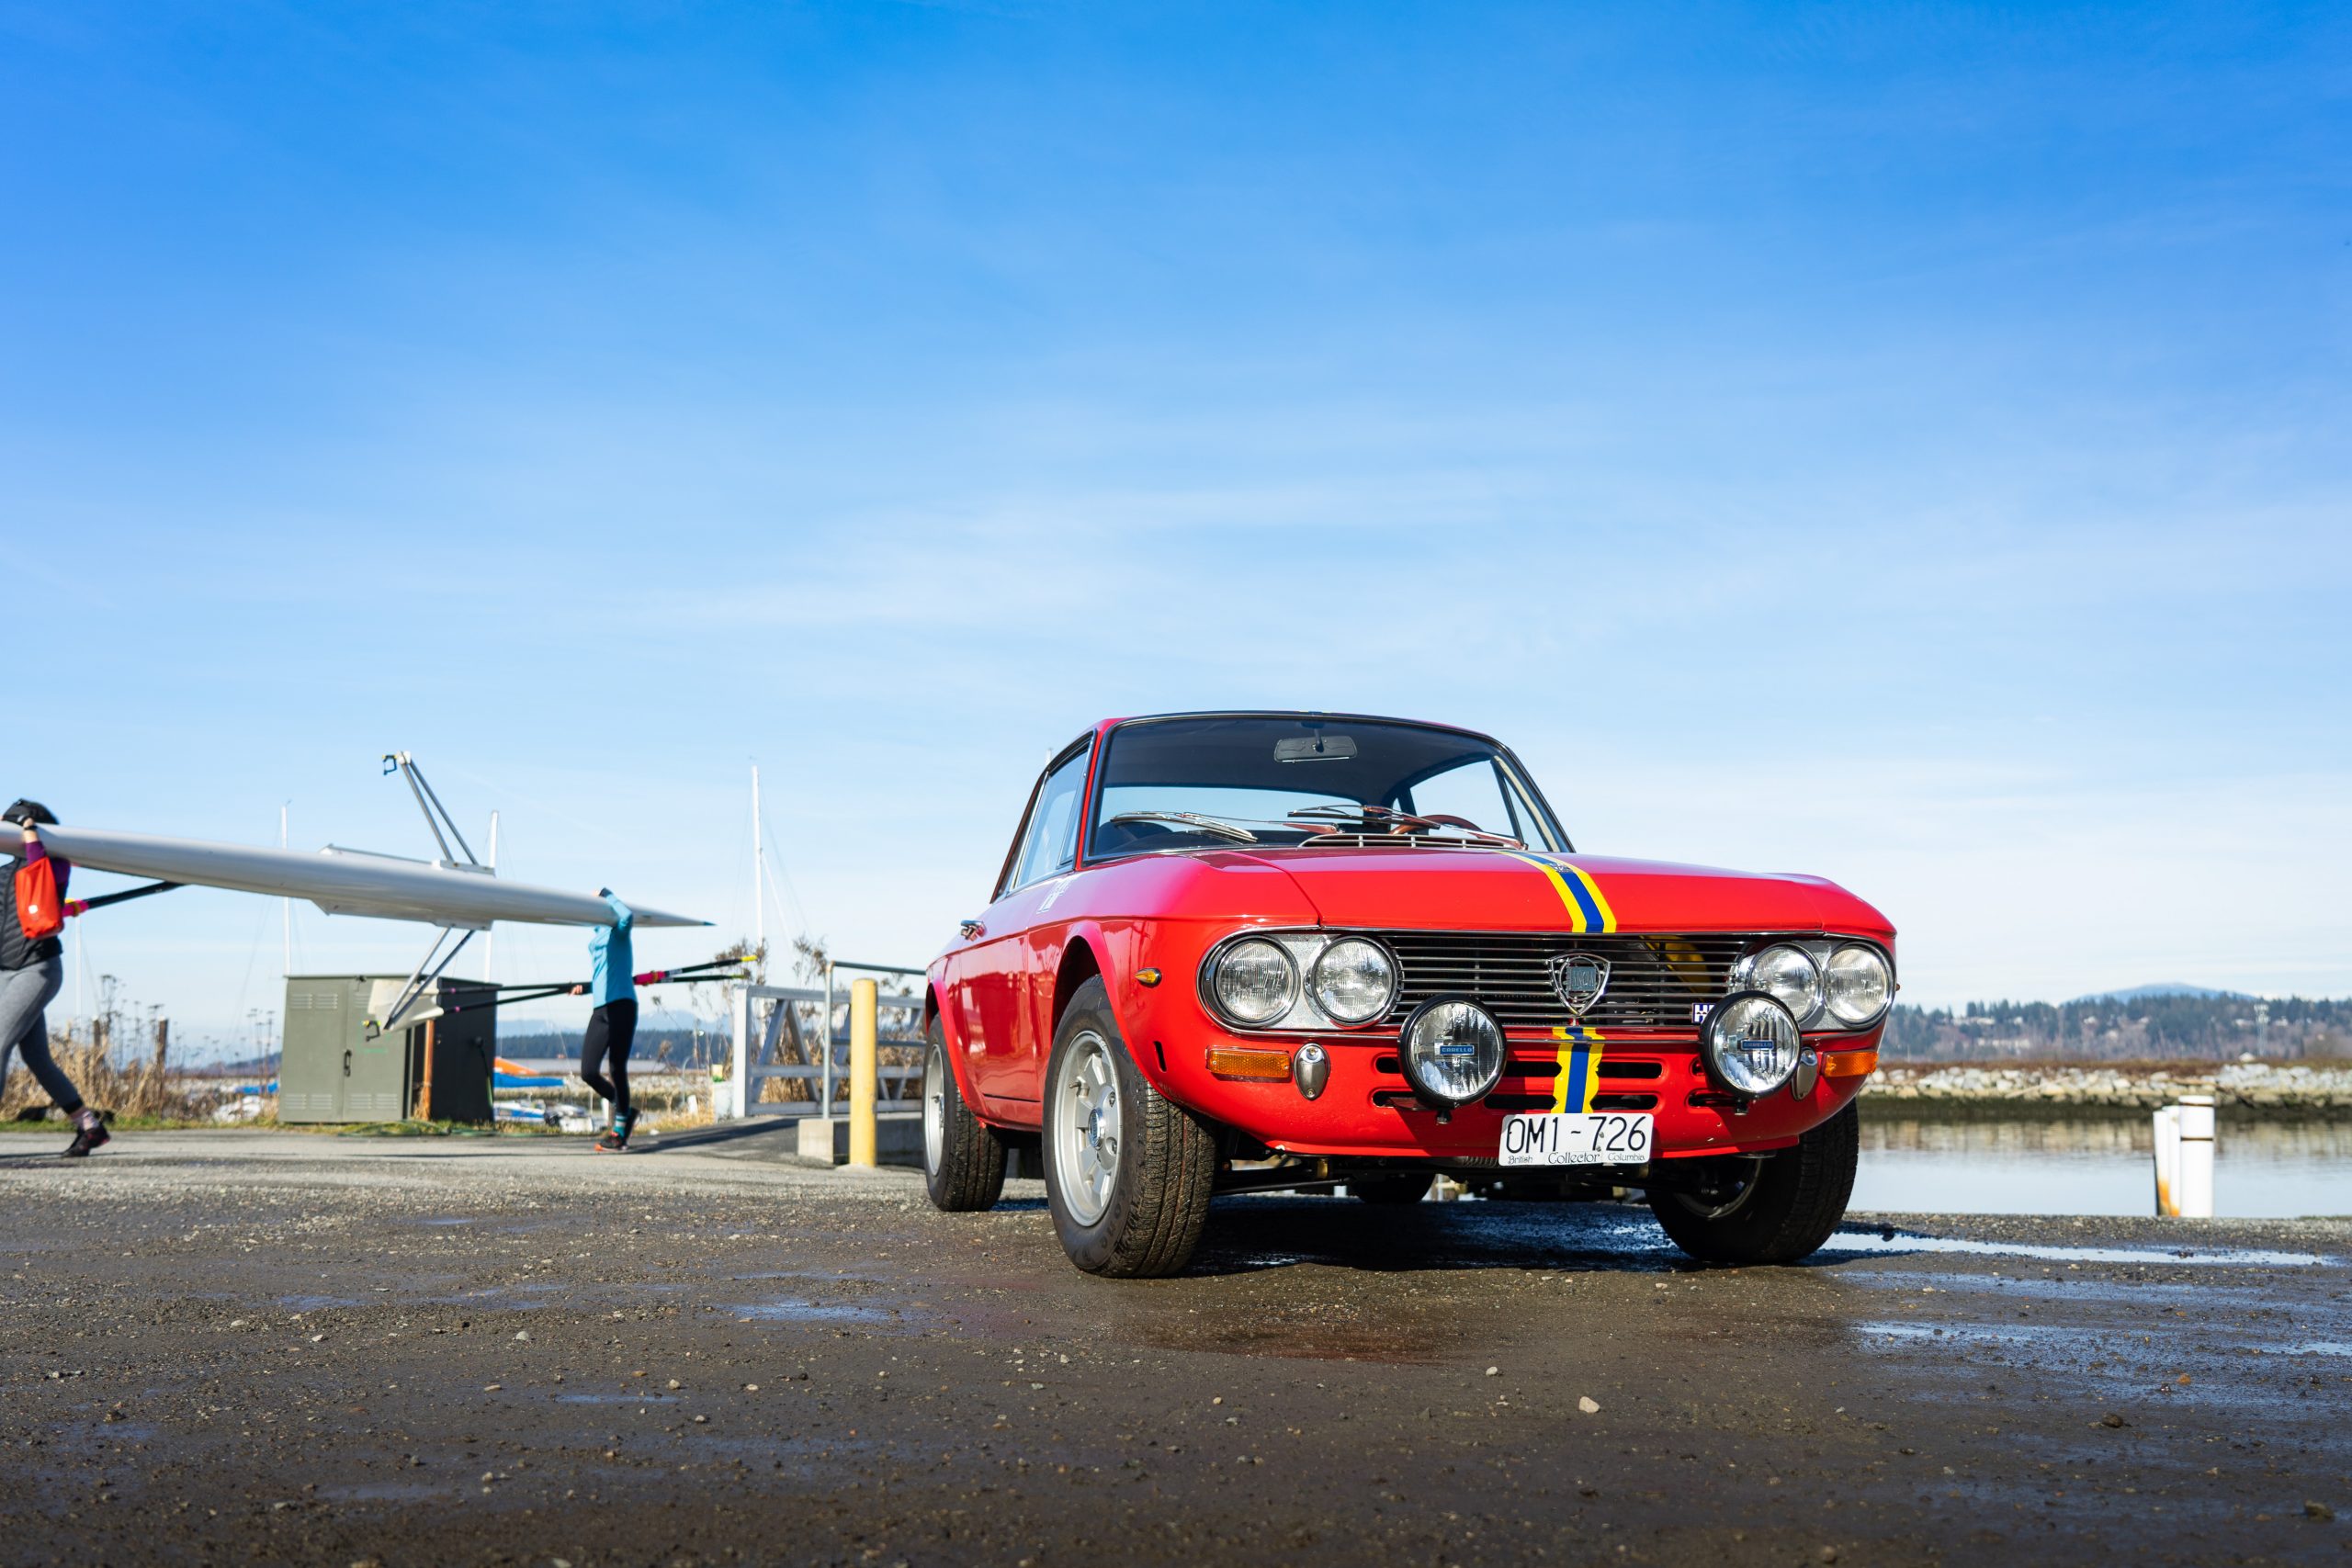 Before the Stratos put Lancia on the rallying map, the humble Fulvia taught it the ropes